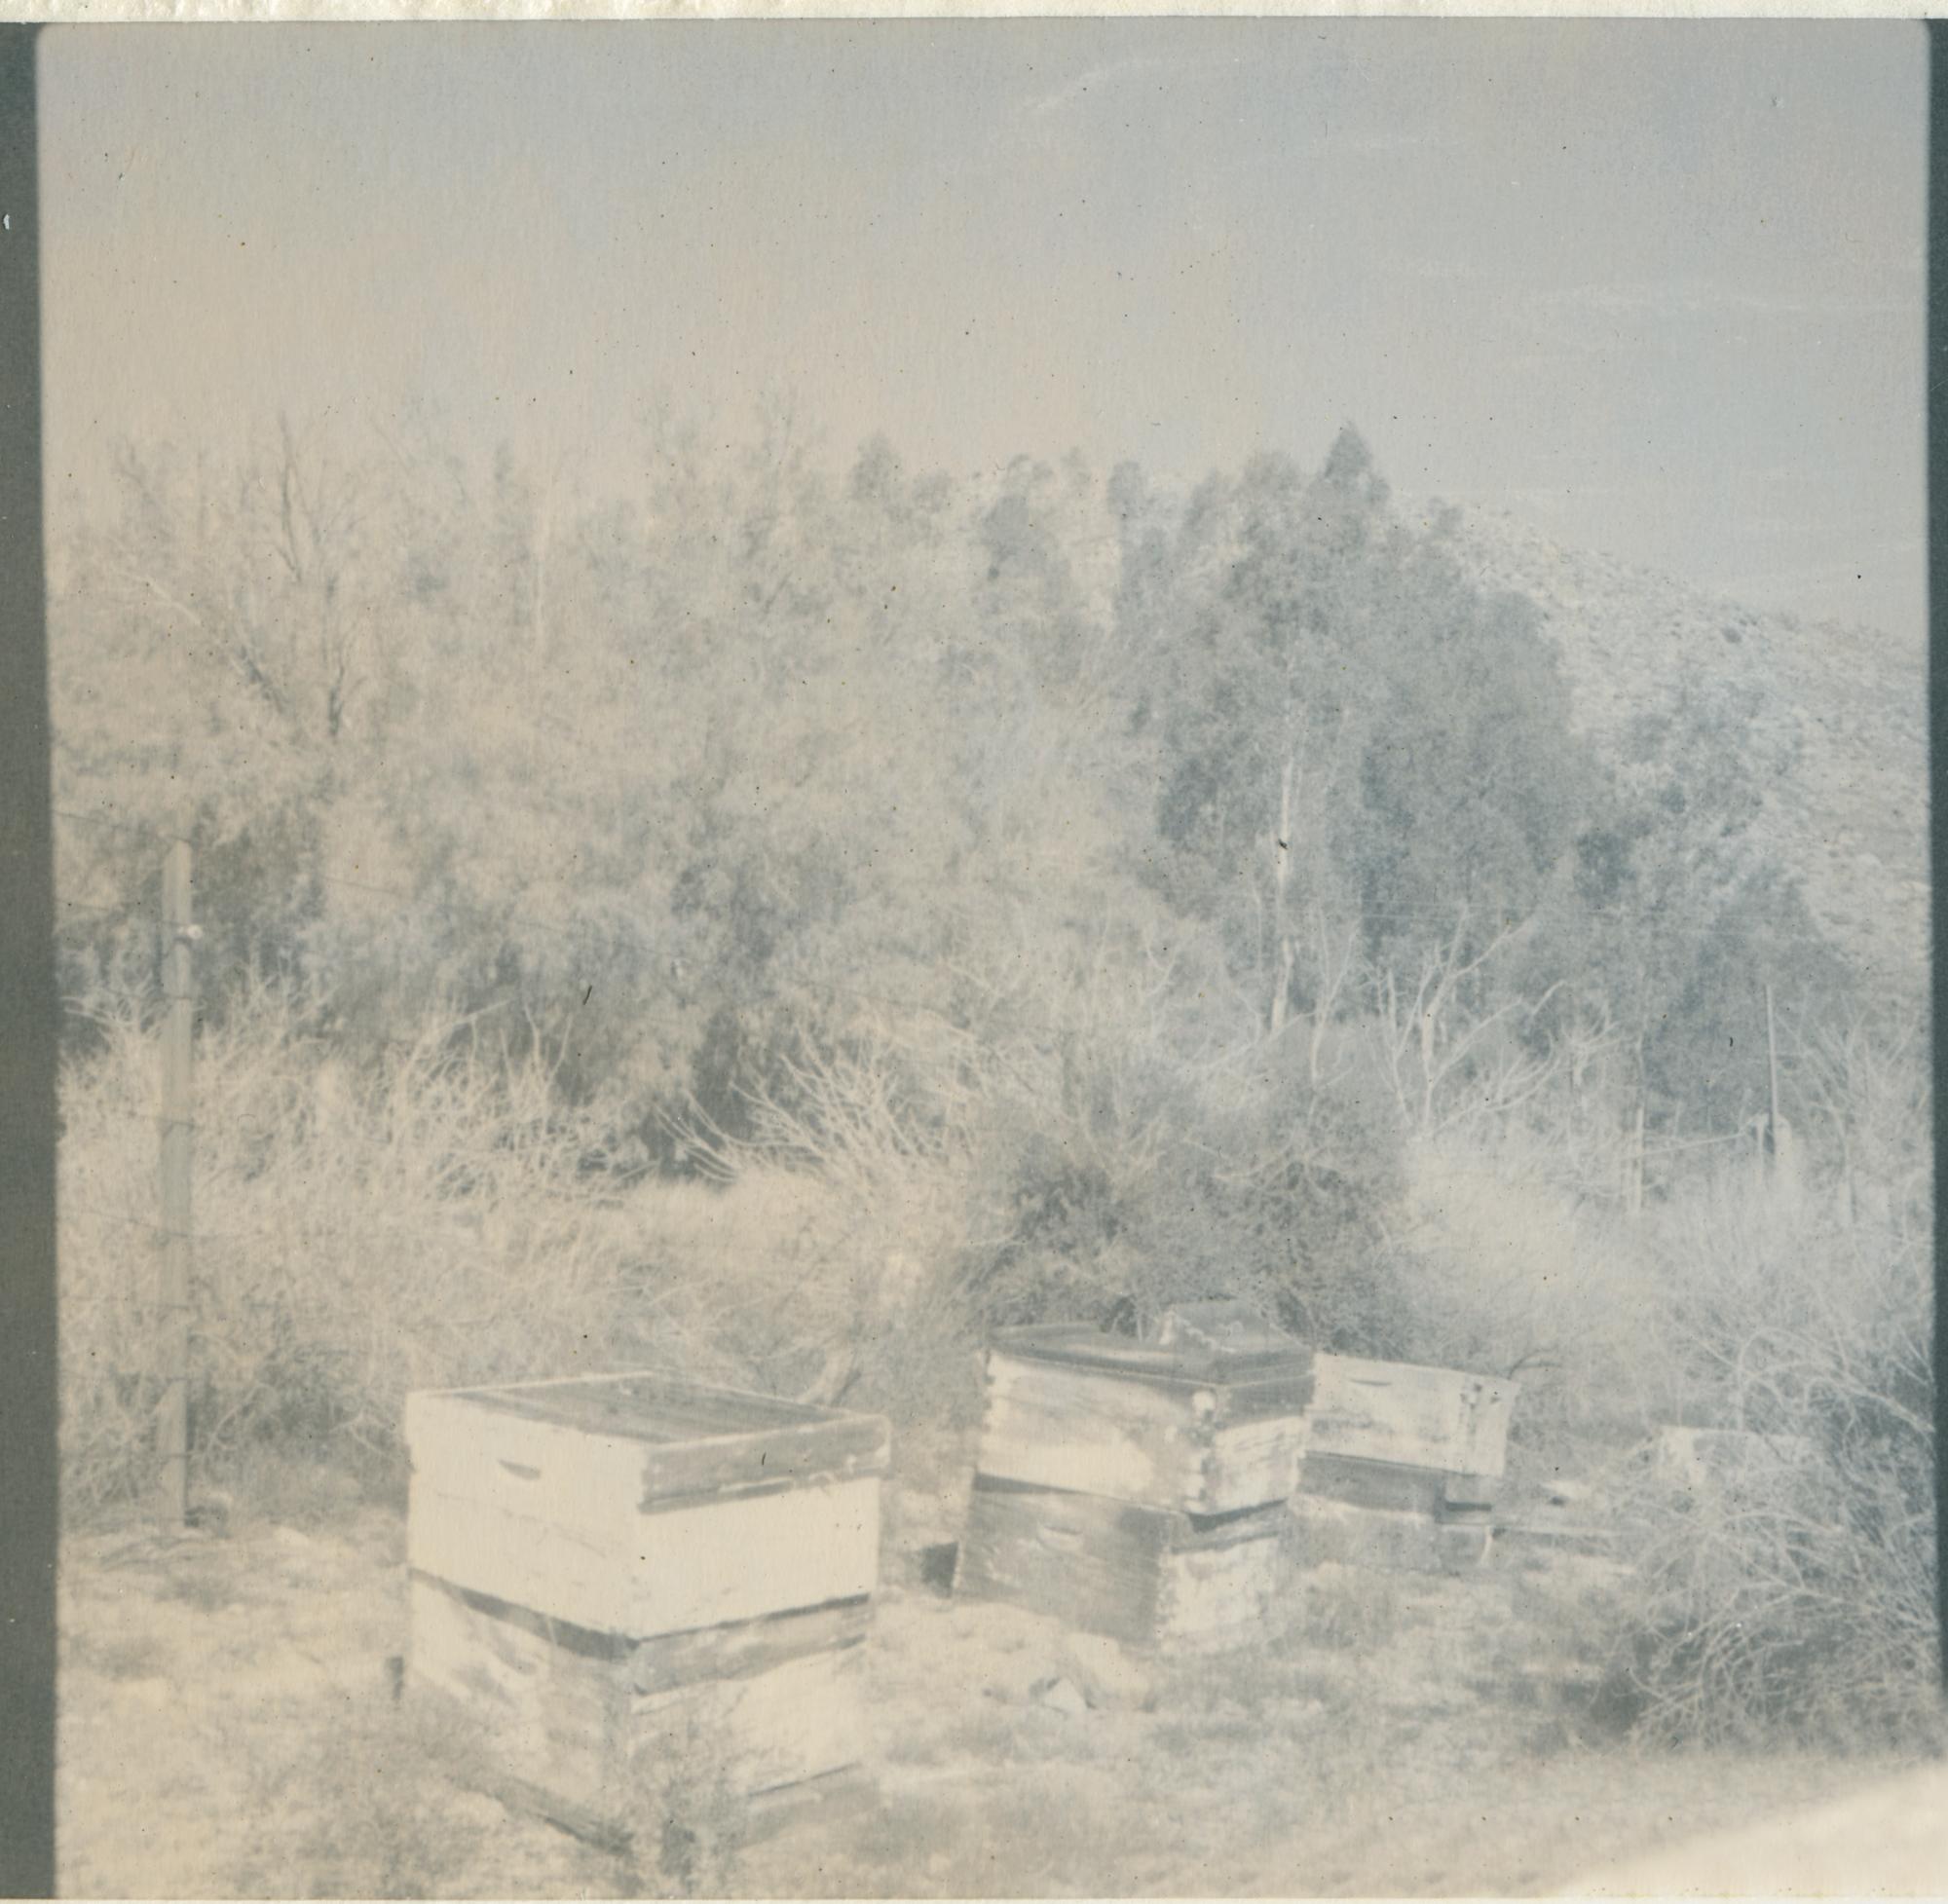 Stefanie Schneider Color Photograph - Deserted Bee Boxes (California Dreaming) - Contemporary, 21st Century, Polaroid